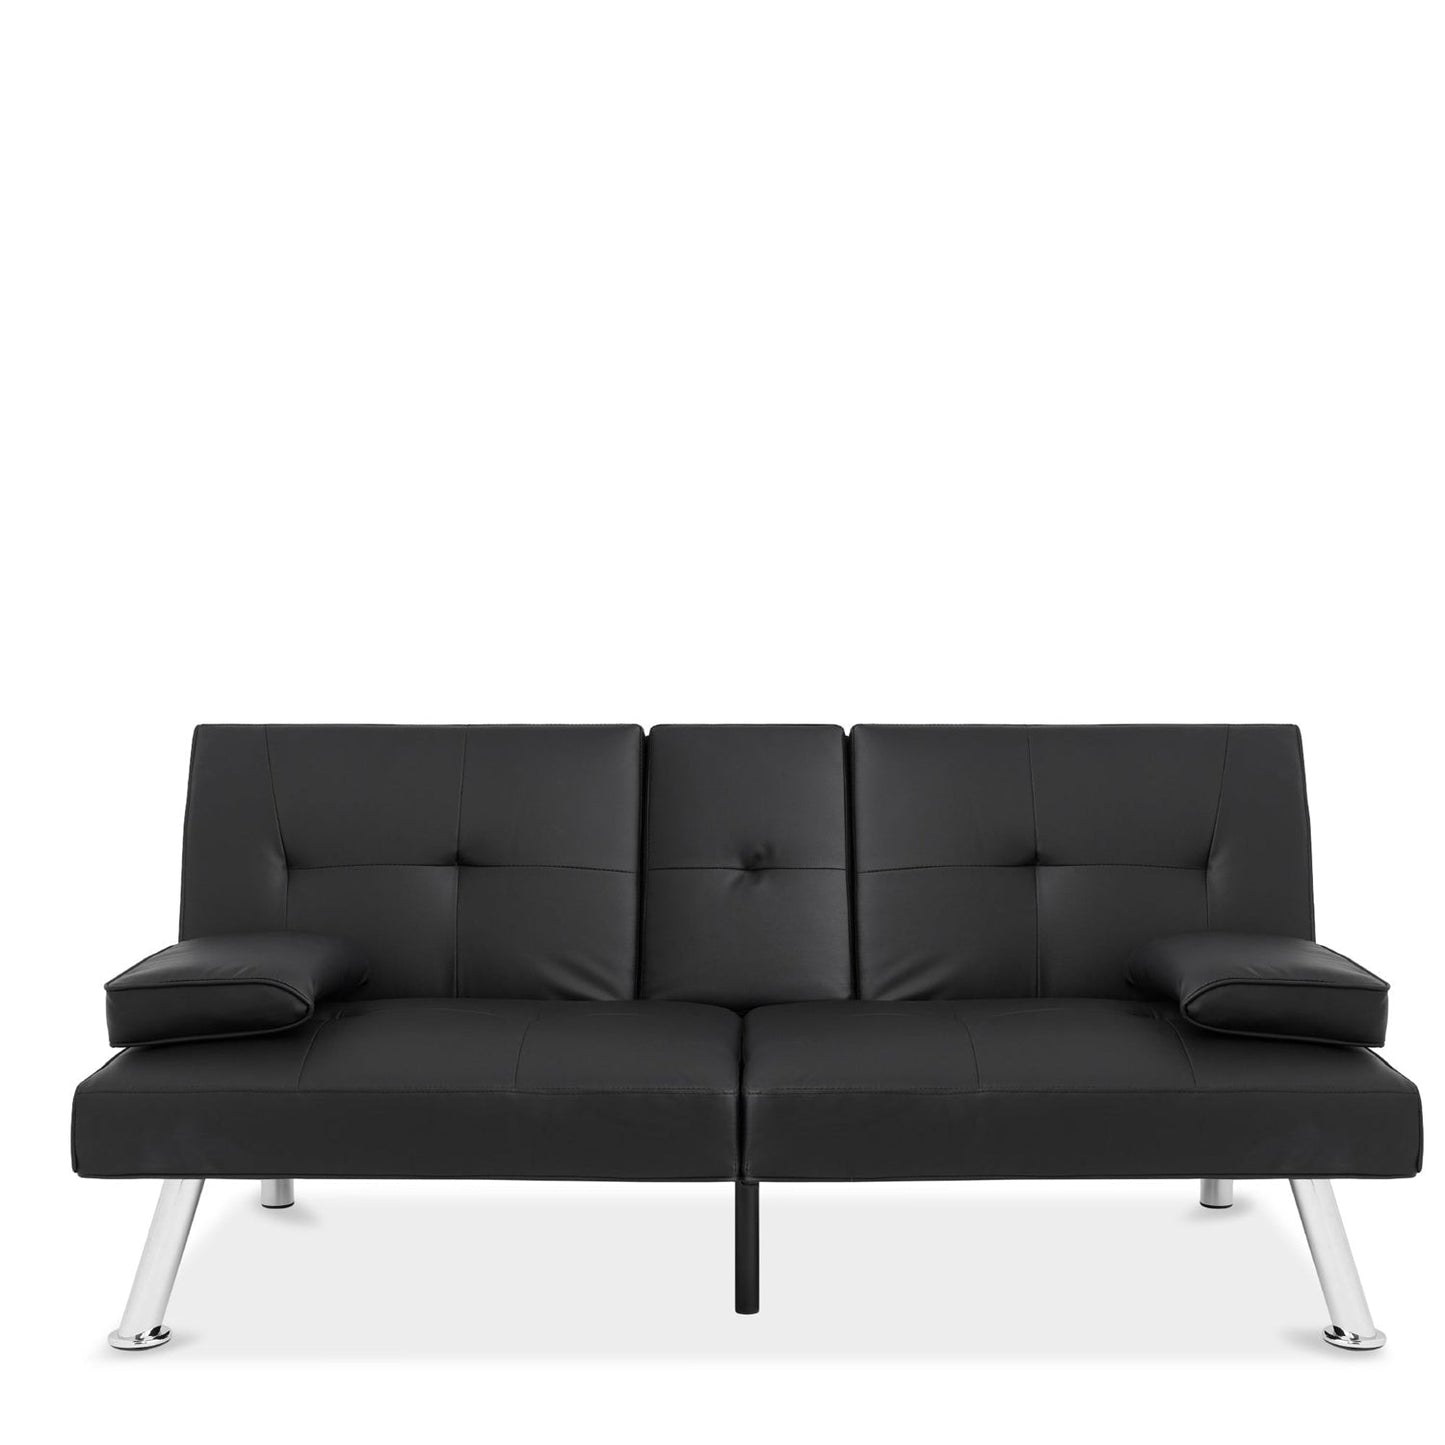 Living Room > Sofas - Black Faux Leather Convertible Sofa Futon With 2 Cup Holders